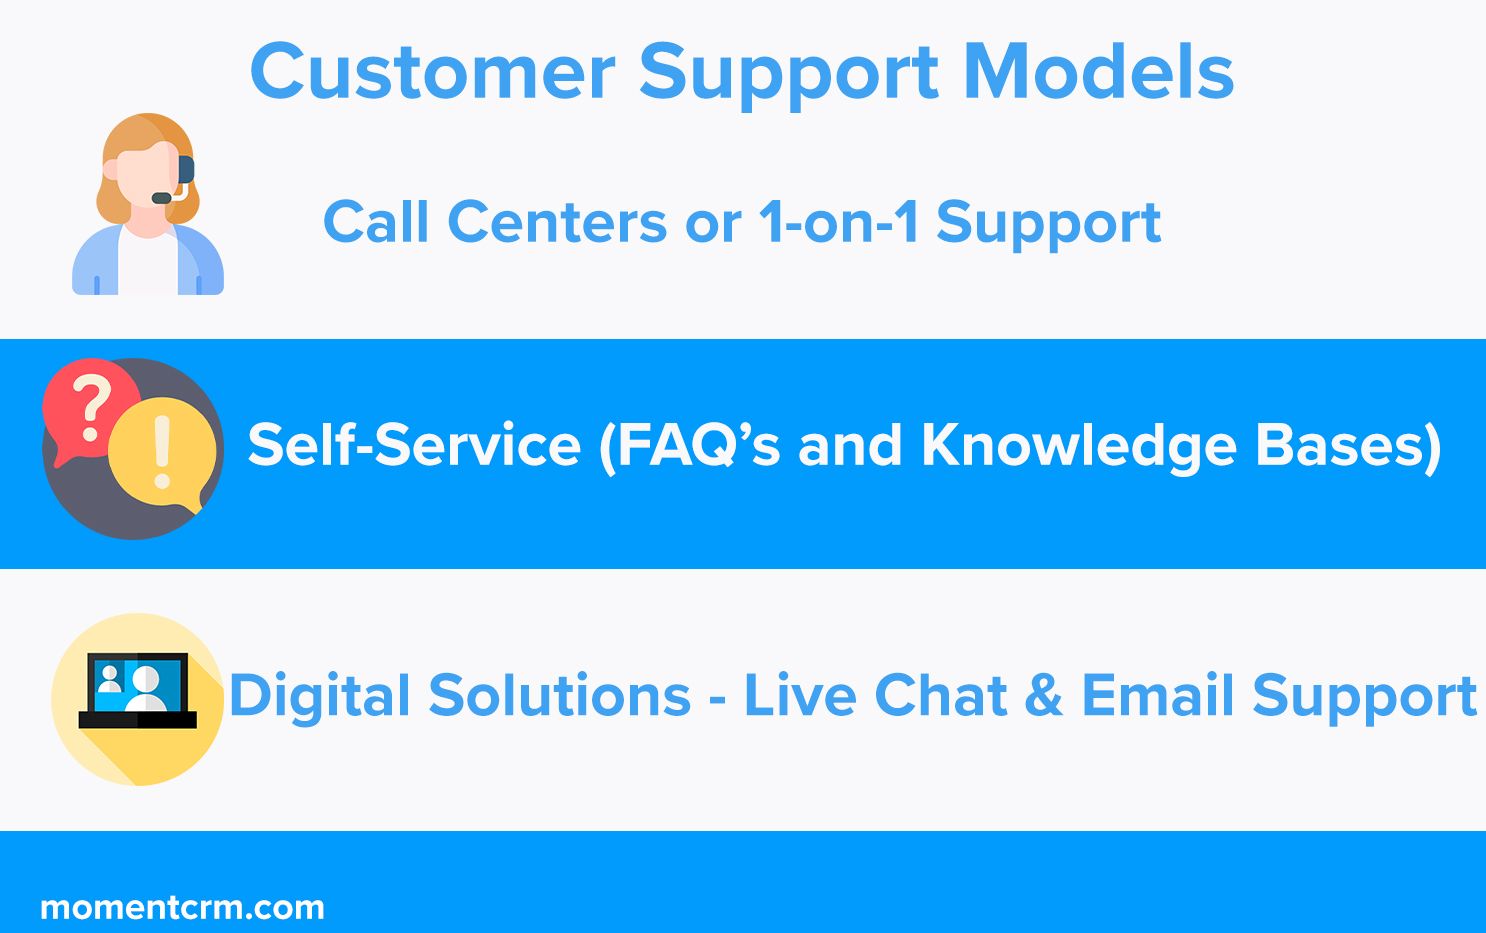 3 types of customer support models